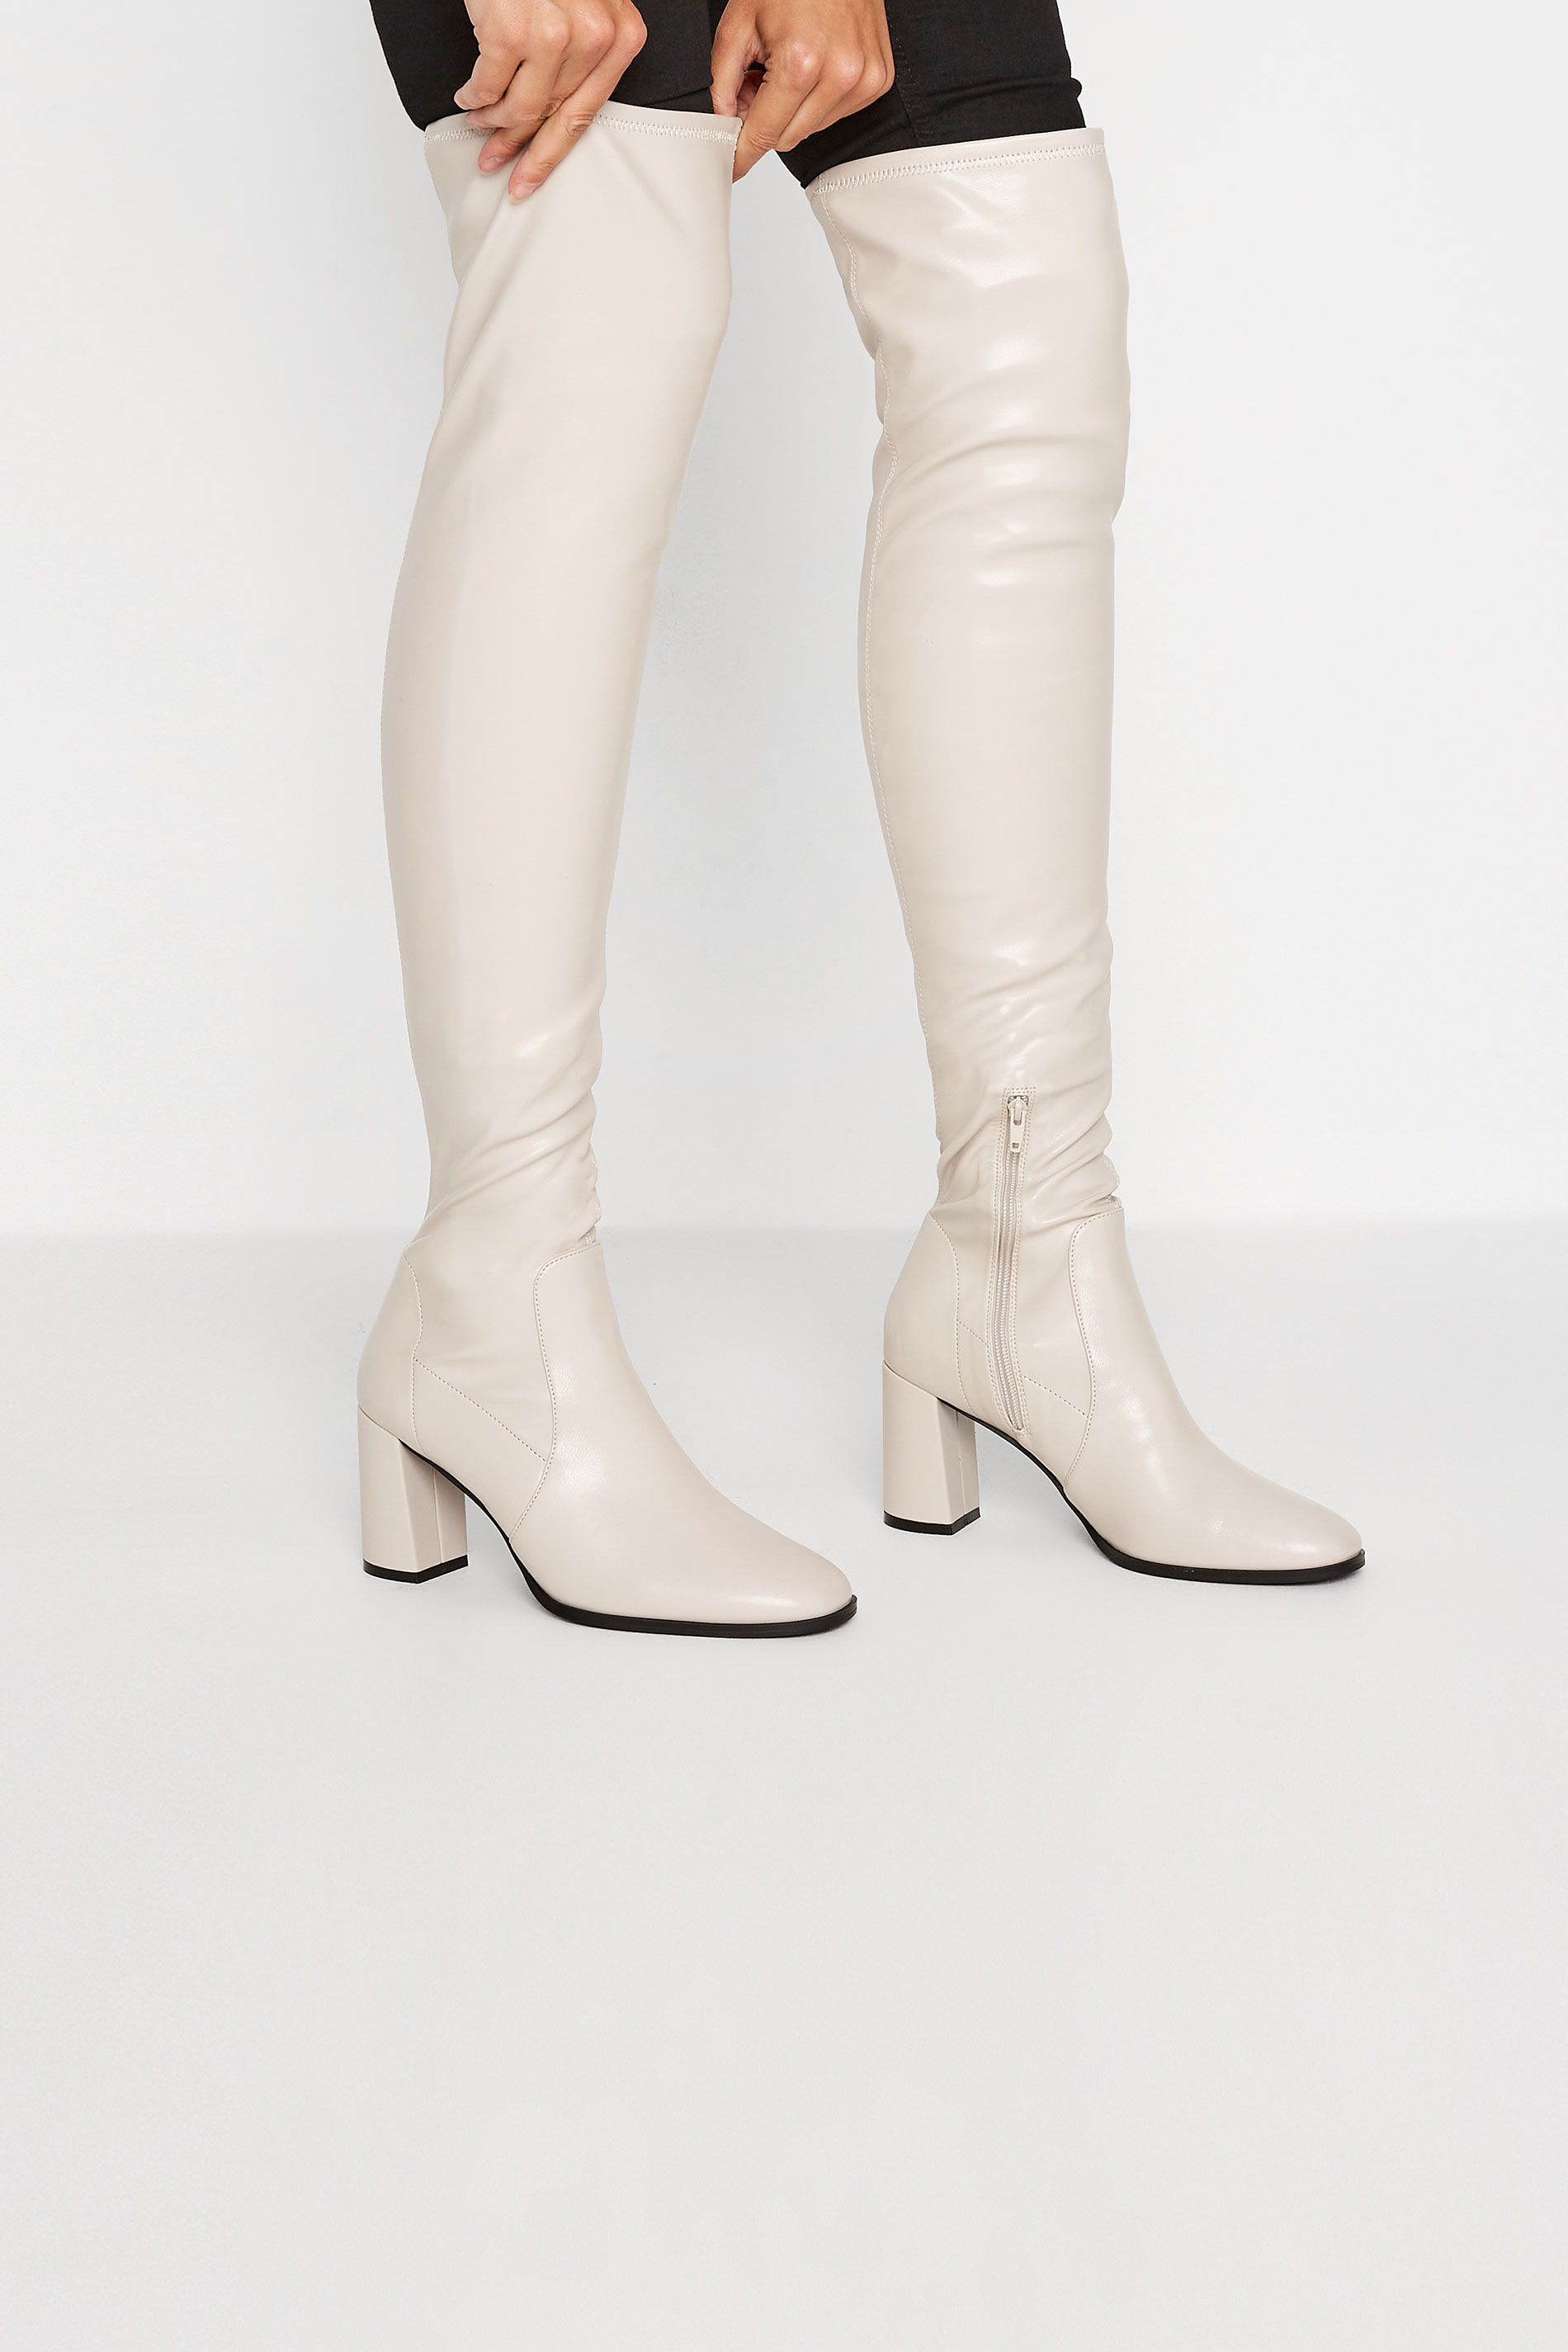 LTS Cream Heeled Over The Knee Boots In Standard D Fit | Long Tall Sally 1